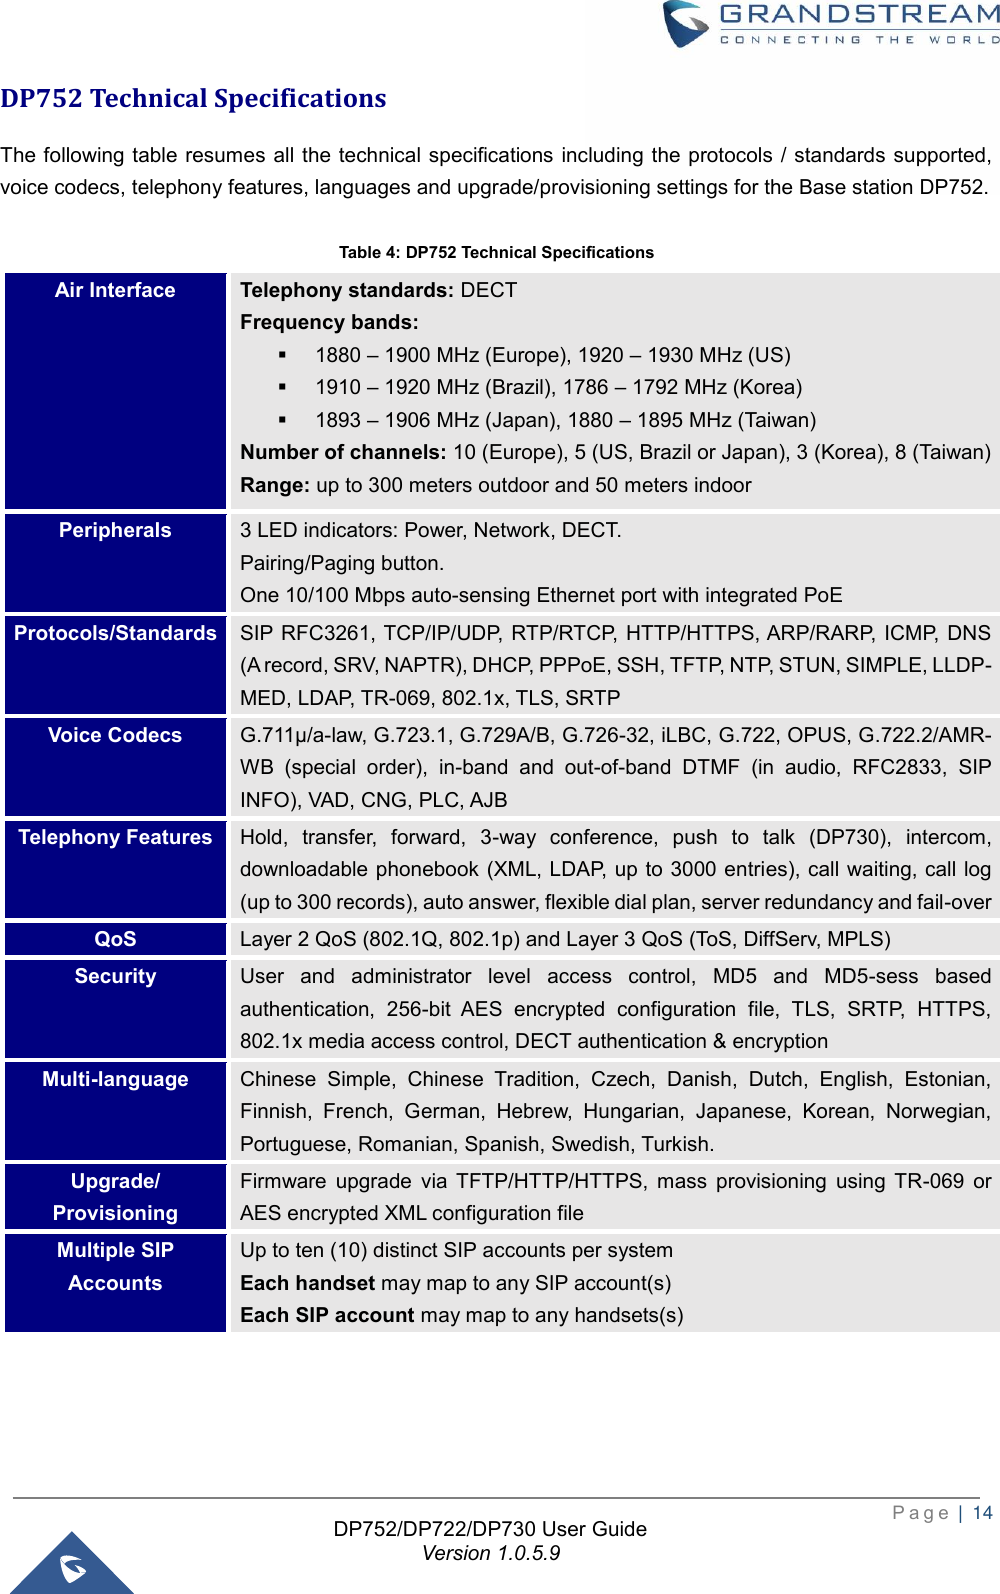  P a g e  |  14   DP752/DP722/DP730 User Guide Version 1.0.5.9   DP752 Technical Specifications The following  table resumes  all the technical specifications  including the protocols / standards supported, voice codecs, telephony features, languages and upgrade/provisioning settings for the Base station DP752.  Table 4: DP752 Technical Specifications Air Interface Telephony standards: DECT Frequency bands: ▪ 1880 – 1900 MHz (Europe), 1920 – 1930 MHz (US) ▪ 1910 – 1920 MHz (Brazil), 1786 – 1792 MHz (Korea) ▪ 1893 – 1906 MHz (Japan), 1880 – 1895 MHz (Taiwan) Number of channels: 10 (Europe), 5 (US, Brazil or Japan), 3 (Korea), 8 (Taiwan)   Range: up to 300 meters outdoor and 50 meters indoor Peripherals 3 LED indicators: Power, Network, DECT. Pairing/Paging button. One 10/100 Mbps auto-sensing Ethernet port with integrated PoE Protocols/Standards SIP RFC3261, TCP/IP/UDP, RTP/RTCP, HTTP/HTTPS, ARP/RARP, ICMP, DNS (A record, SRV, NAPTR), DHCP, PPPoE, SSH, TFTP, NTP, STUN, SIMPLE, LLDP-MED, LDAP, TR-069, 802.1x, TLS, SRTP Voice Codecs G.711μ/a-law, G.723.1, G.729A/B, G.726-32, iLBC, G.722, OPUS, G.722.2/AMR-WB  (special  order),  in-band  and  out-of-band  DTMF  (in  audio,  RFC2833,  SIP INFO), VAD, CNG, PLC, AJB Telephony Features Hold,  transfer,  forward,  3-way  conference,  push  to  talk  (DP730),  intercom, downloadable phonebook (XML, LDAP, up to 3000 entries), call waiting, call log (up to 300 records), auto answer, flexible dial plan, server redundancy and fail-over QoS Layer 2 QoS (802.1Q, 802.1p) and Layer 3 QoS (ToS, DiffServ, MPLS) Security User  and  administrator  level  access  control,  MD5  and  MD5-sess  based authentication,  256-bit  AES  encrypted  configuration  file,  TLS,  SRTP,  HTTPS, 802.1x media access control, DECT authentication &amp; encryption Multi-language Chinese  Simple,  Chinese  Tradition,  Czech,  Danish,  Dutch,  English,  Estonian, Finnish,  French,  German,  Hebrew,  Hungarian,  Japanese,  Korean,  Norwegian, Portuguese, Romanian, Spanish, Swedish, Turkish. Upgrade/ Provisioning Firmware  upgrade  via TFTP/HTTP/HTTPS,  mass  provisioning  using  TR-069  or AES encrypted XML configuration file Multiple SIP Accounts Up to ten (10) distinct SIP accounts per system Each handset may map to any SIP account(s) Each SIP account may map to any handsets(s) 